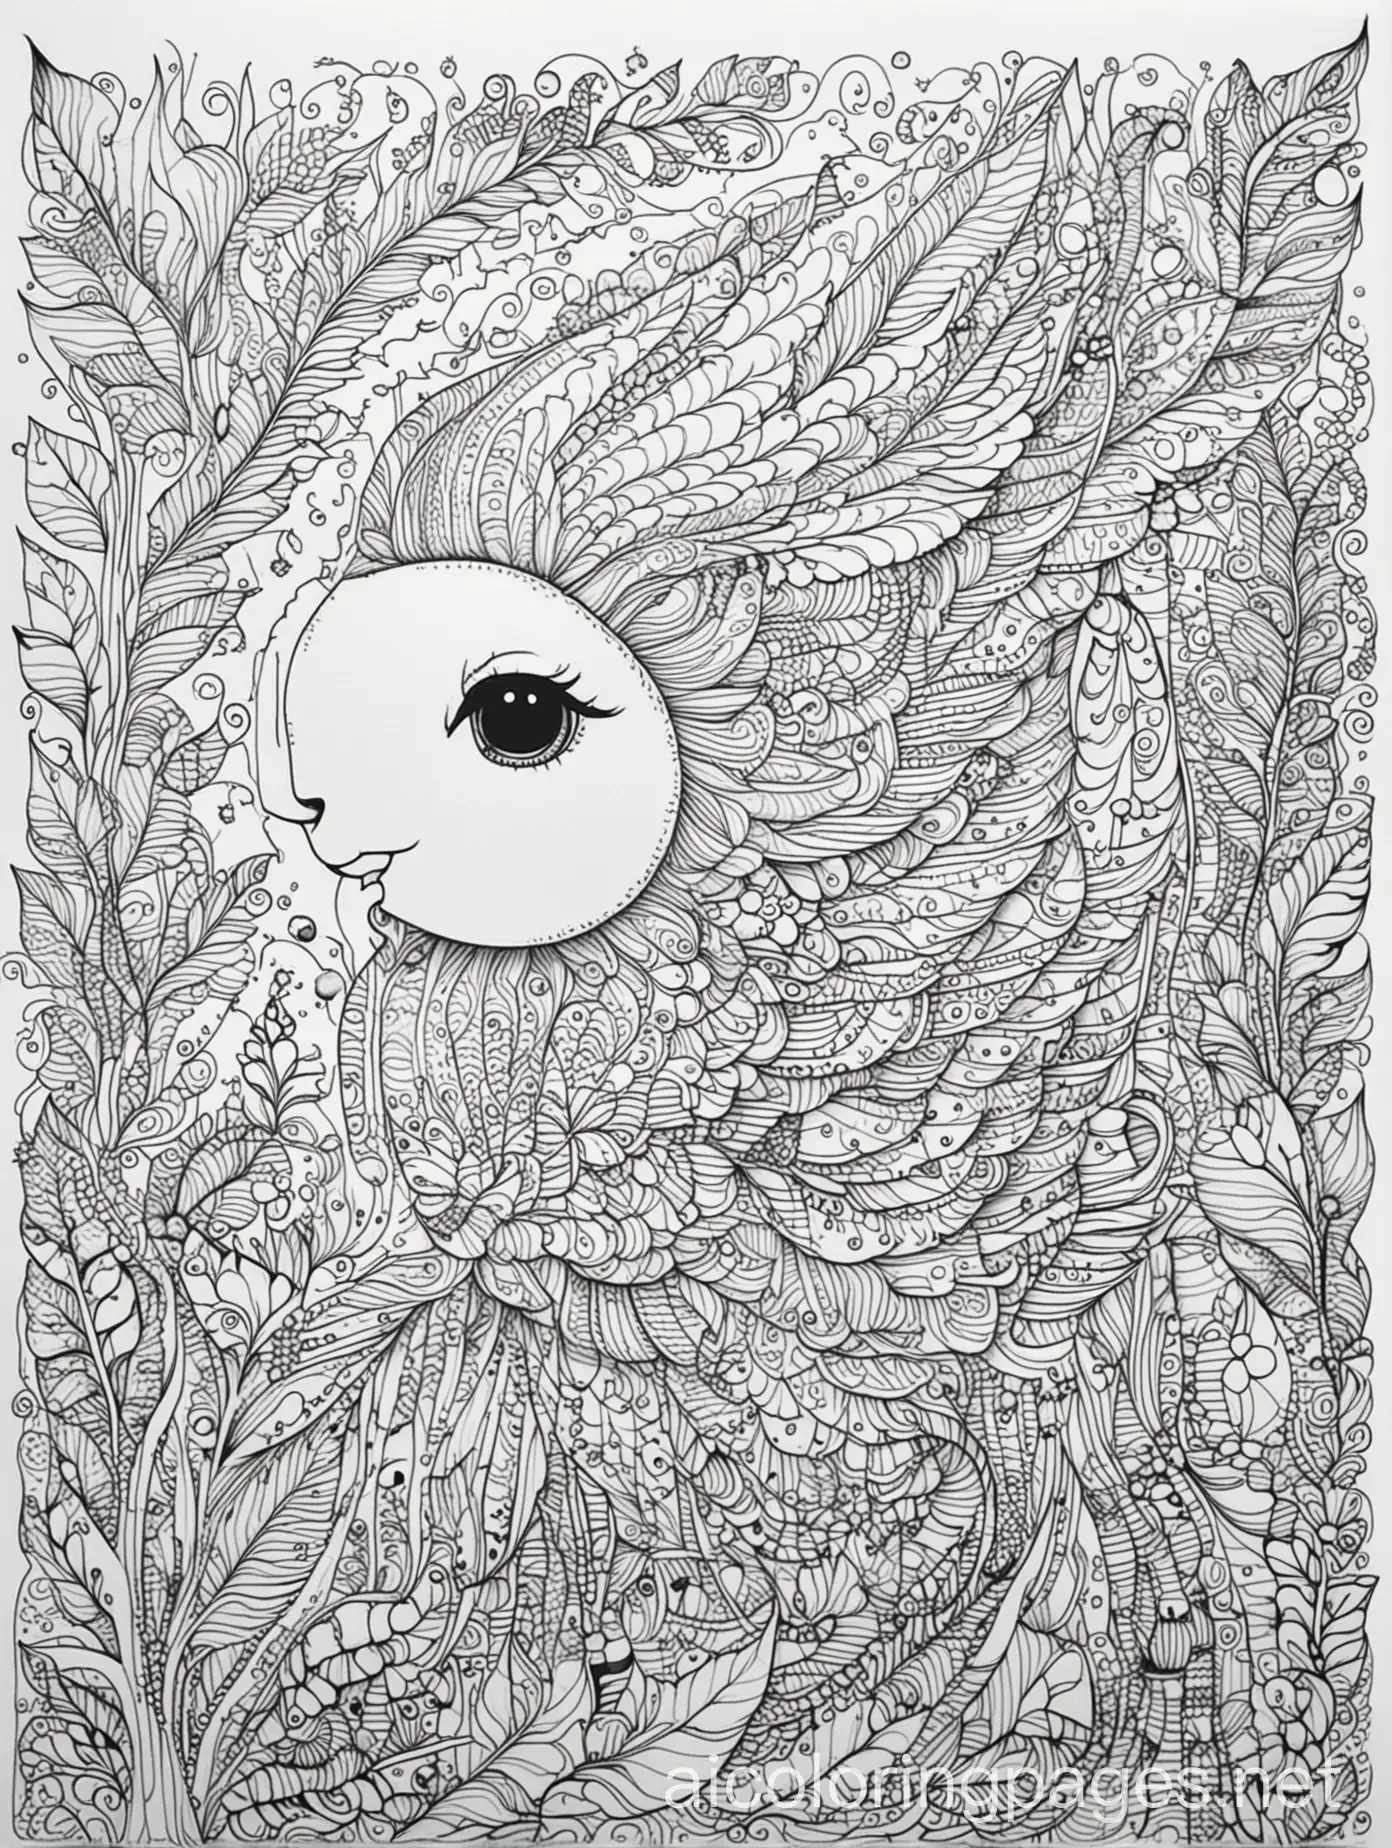 Intricate-Black-and-White-Coloring-Page-for-Kids-Simple-and-Fun-Activity